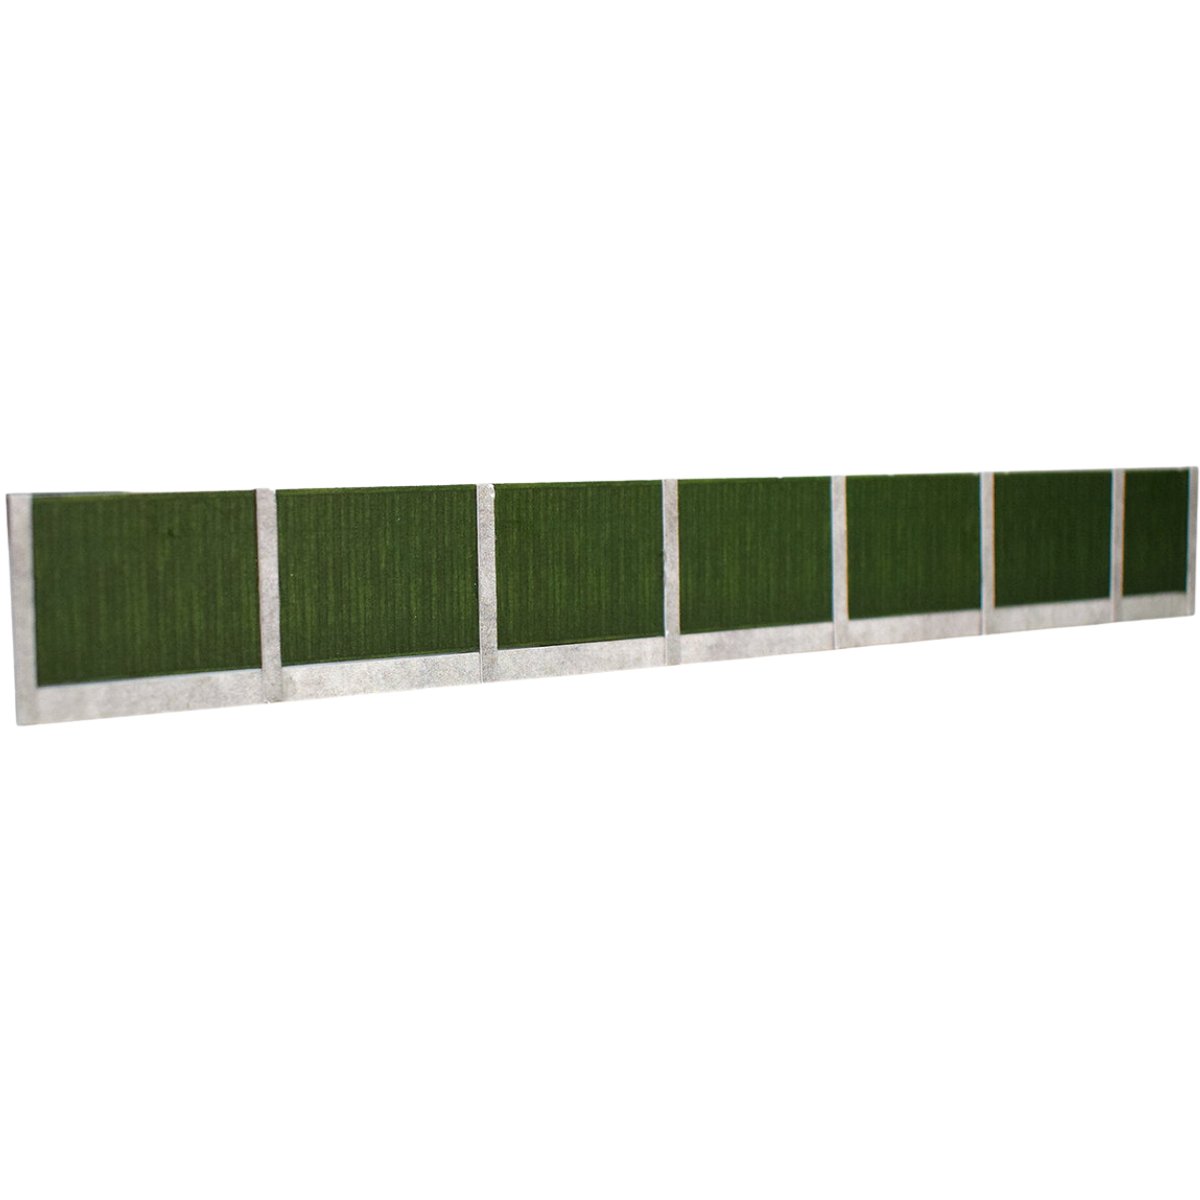 ATD Models Timber Fence with Concrete Posts (Green) - OO Gauge - Phillips Hobbies